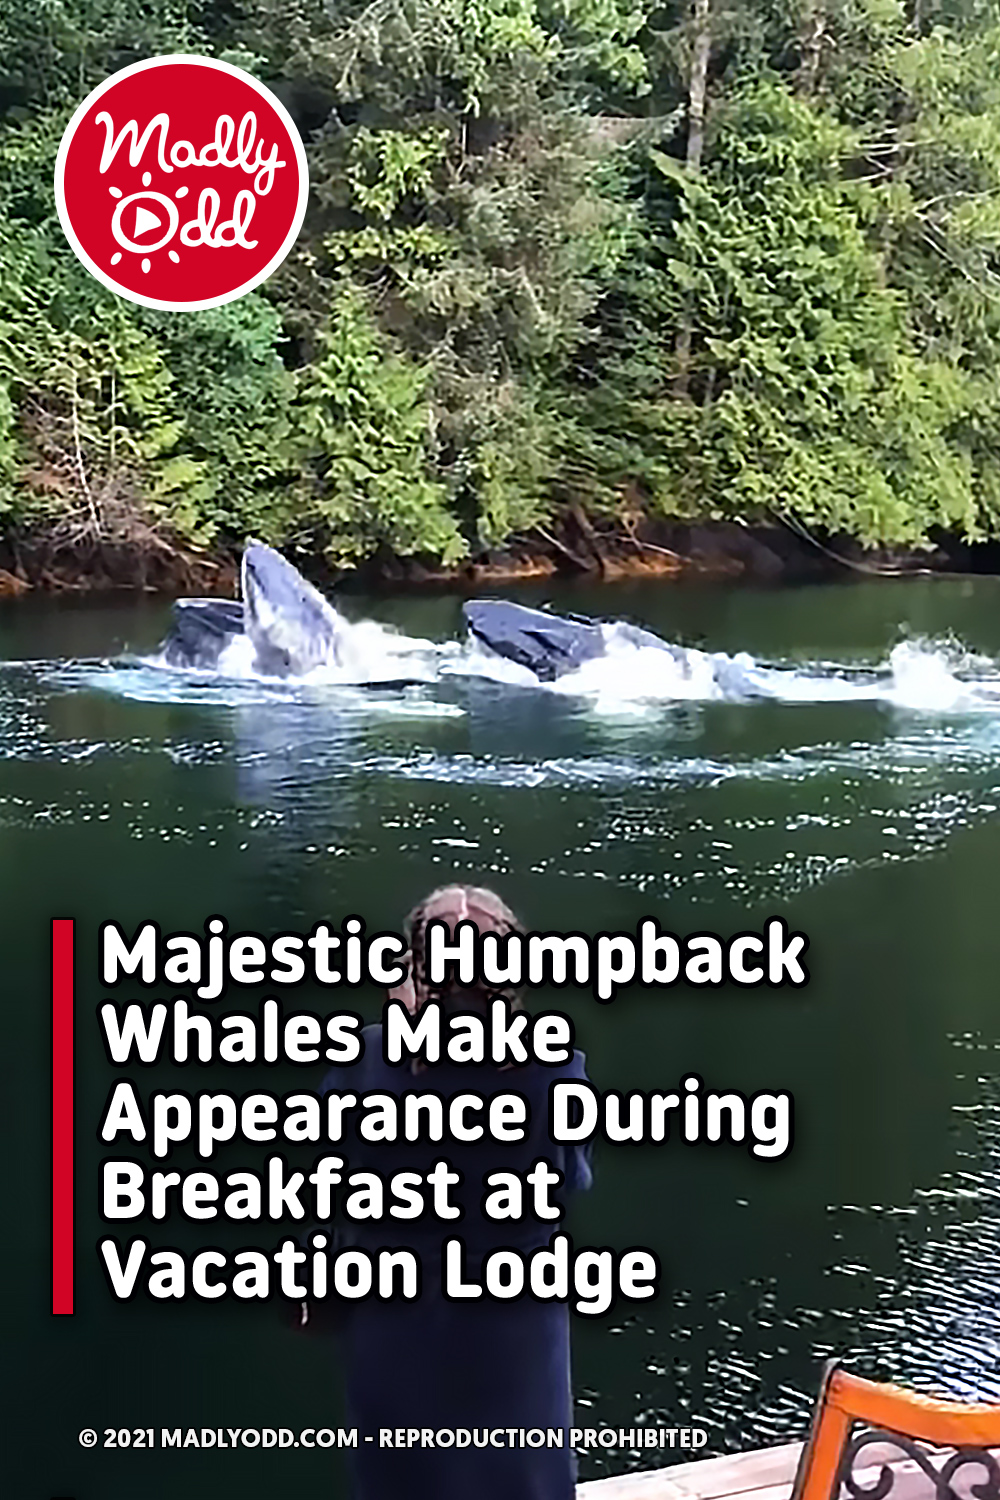 Majestic Humpback Whales Make Appearance During Breakfast at Vacation Lodge